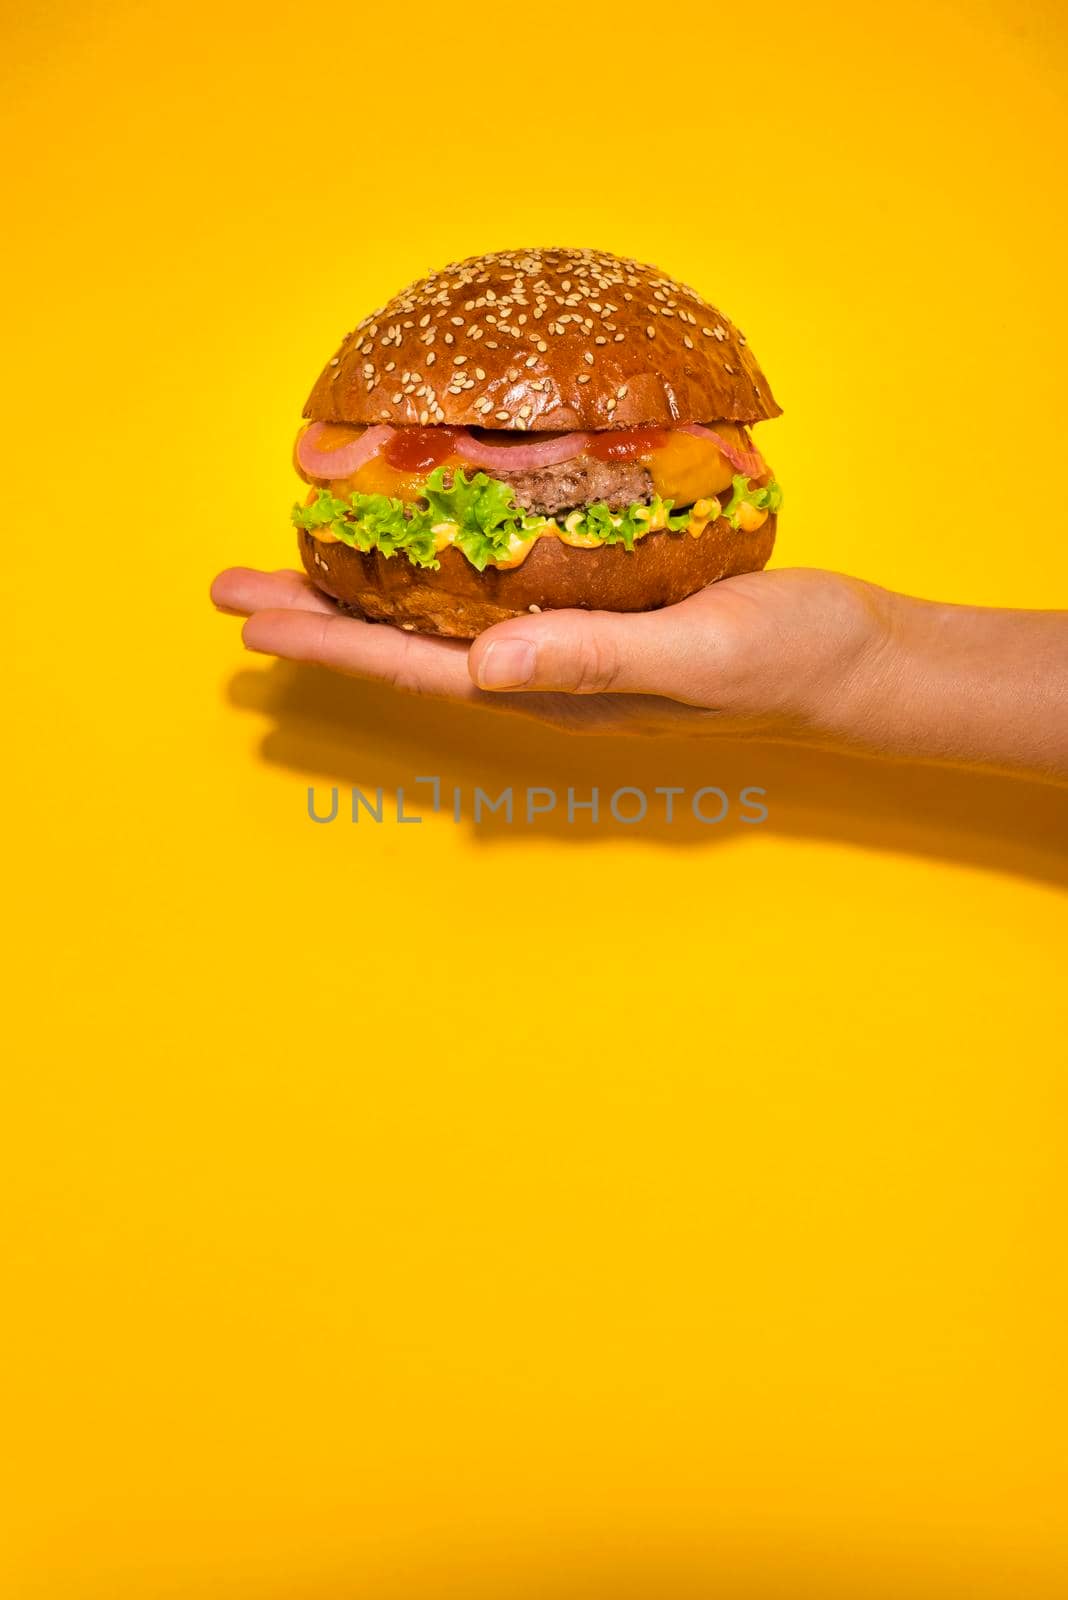 hand holding classic beef burger with lettuce. High quality photo by Zahard